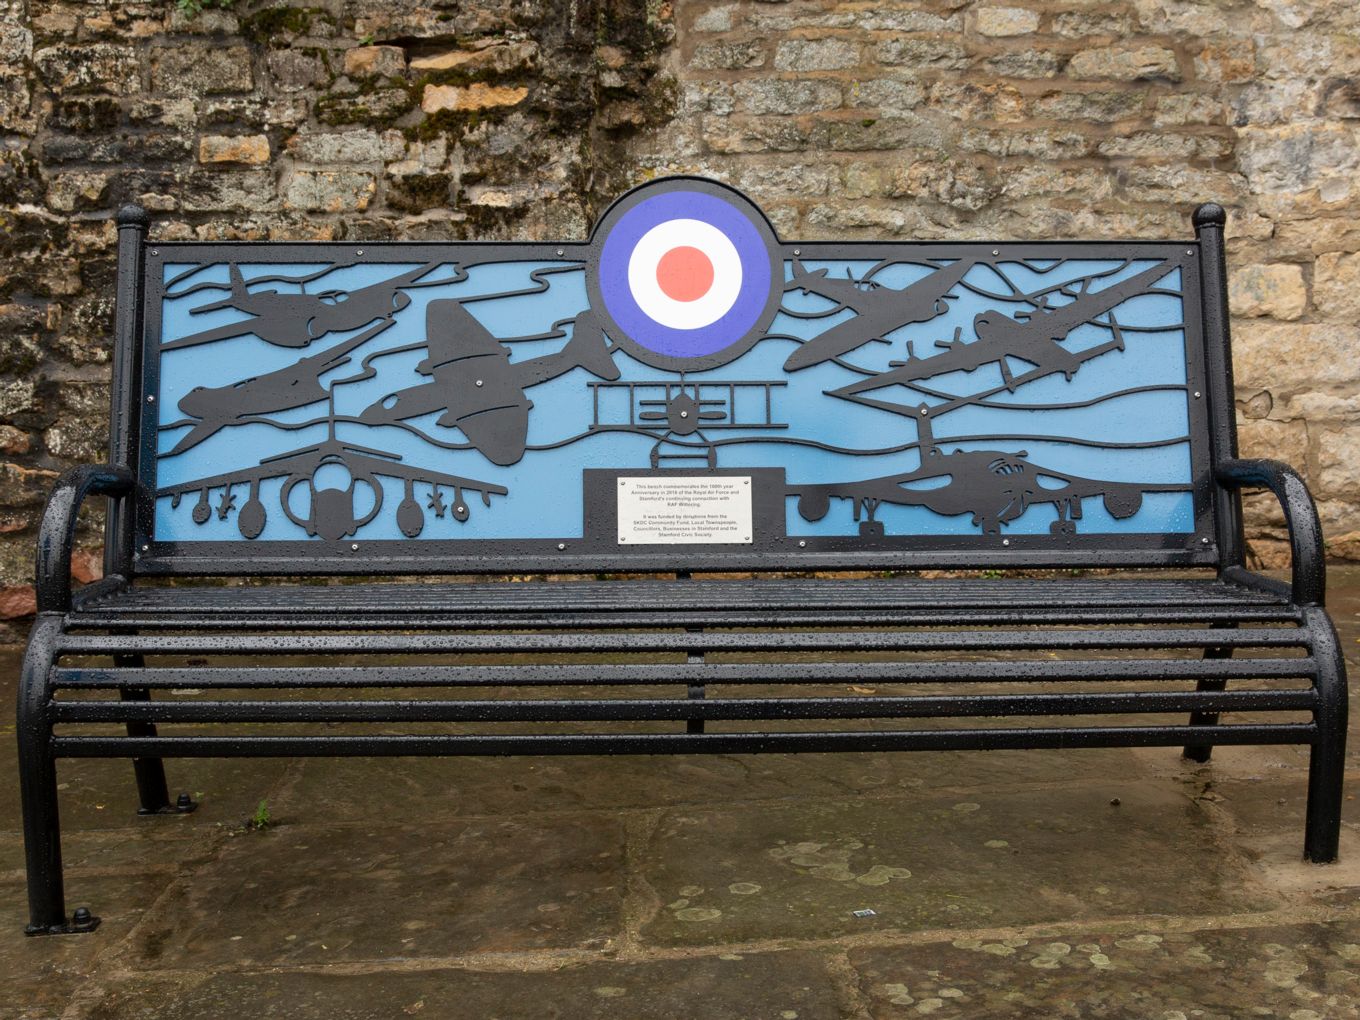 Images of the new bench.